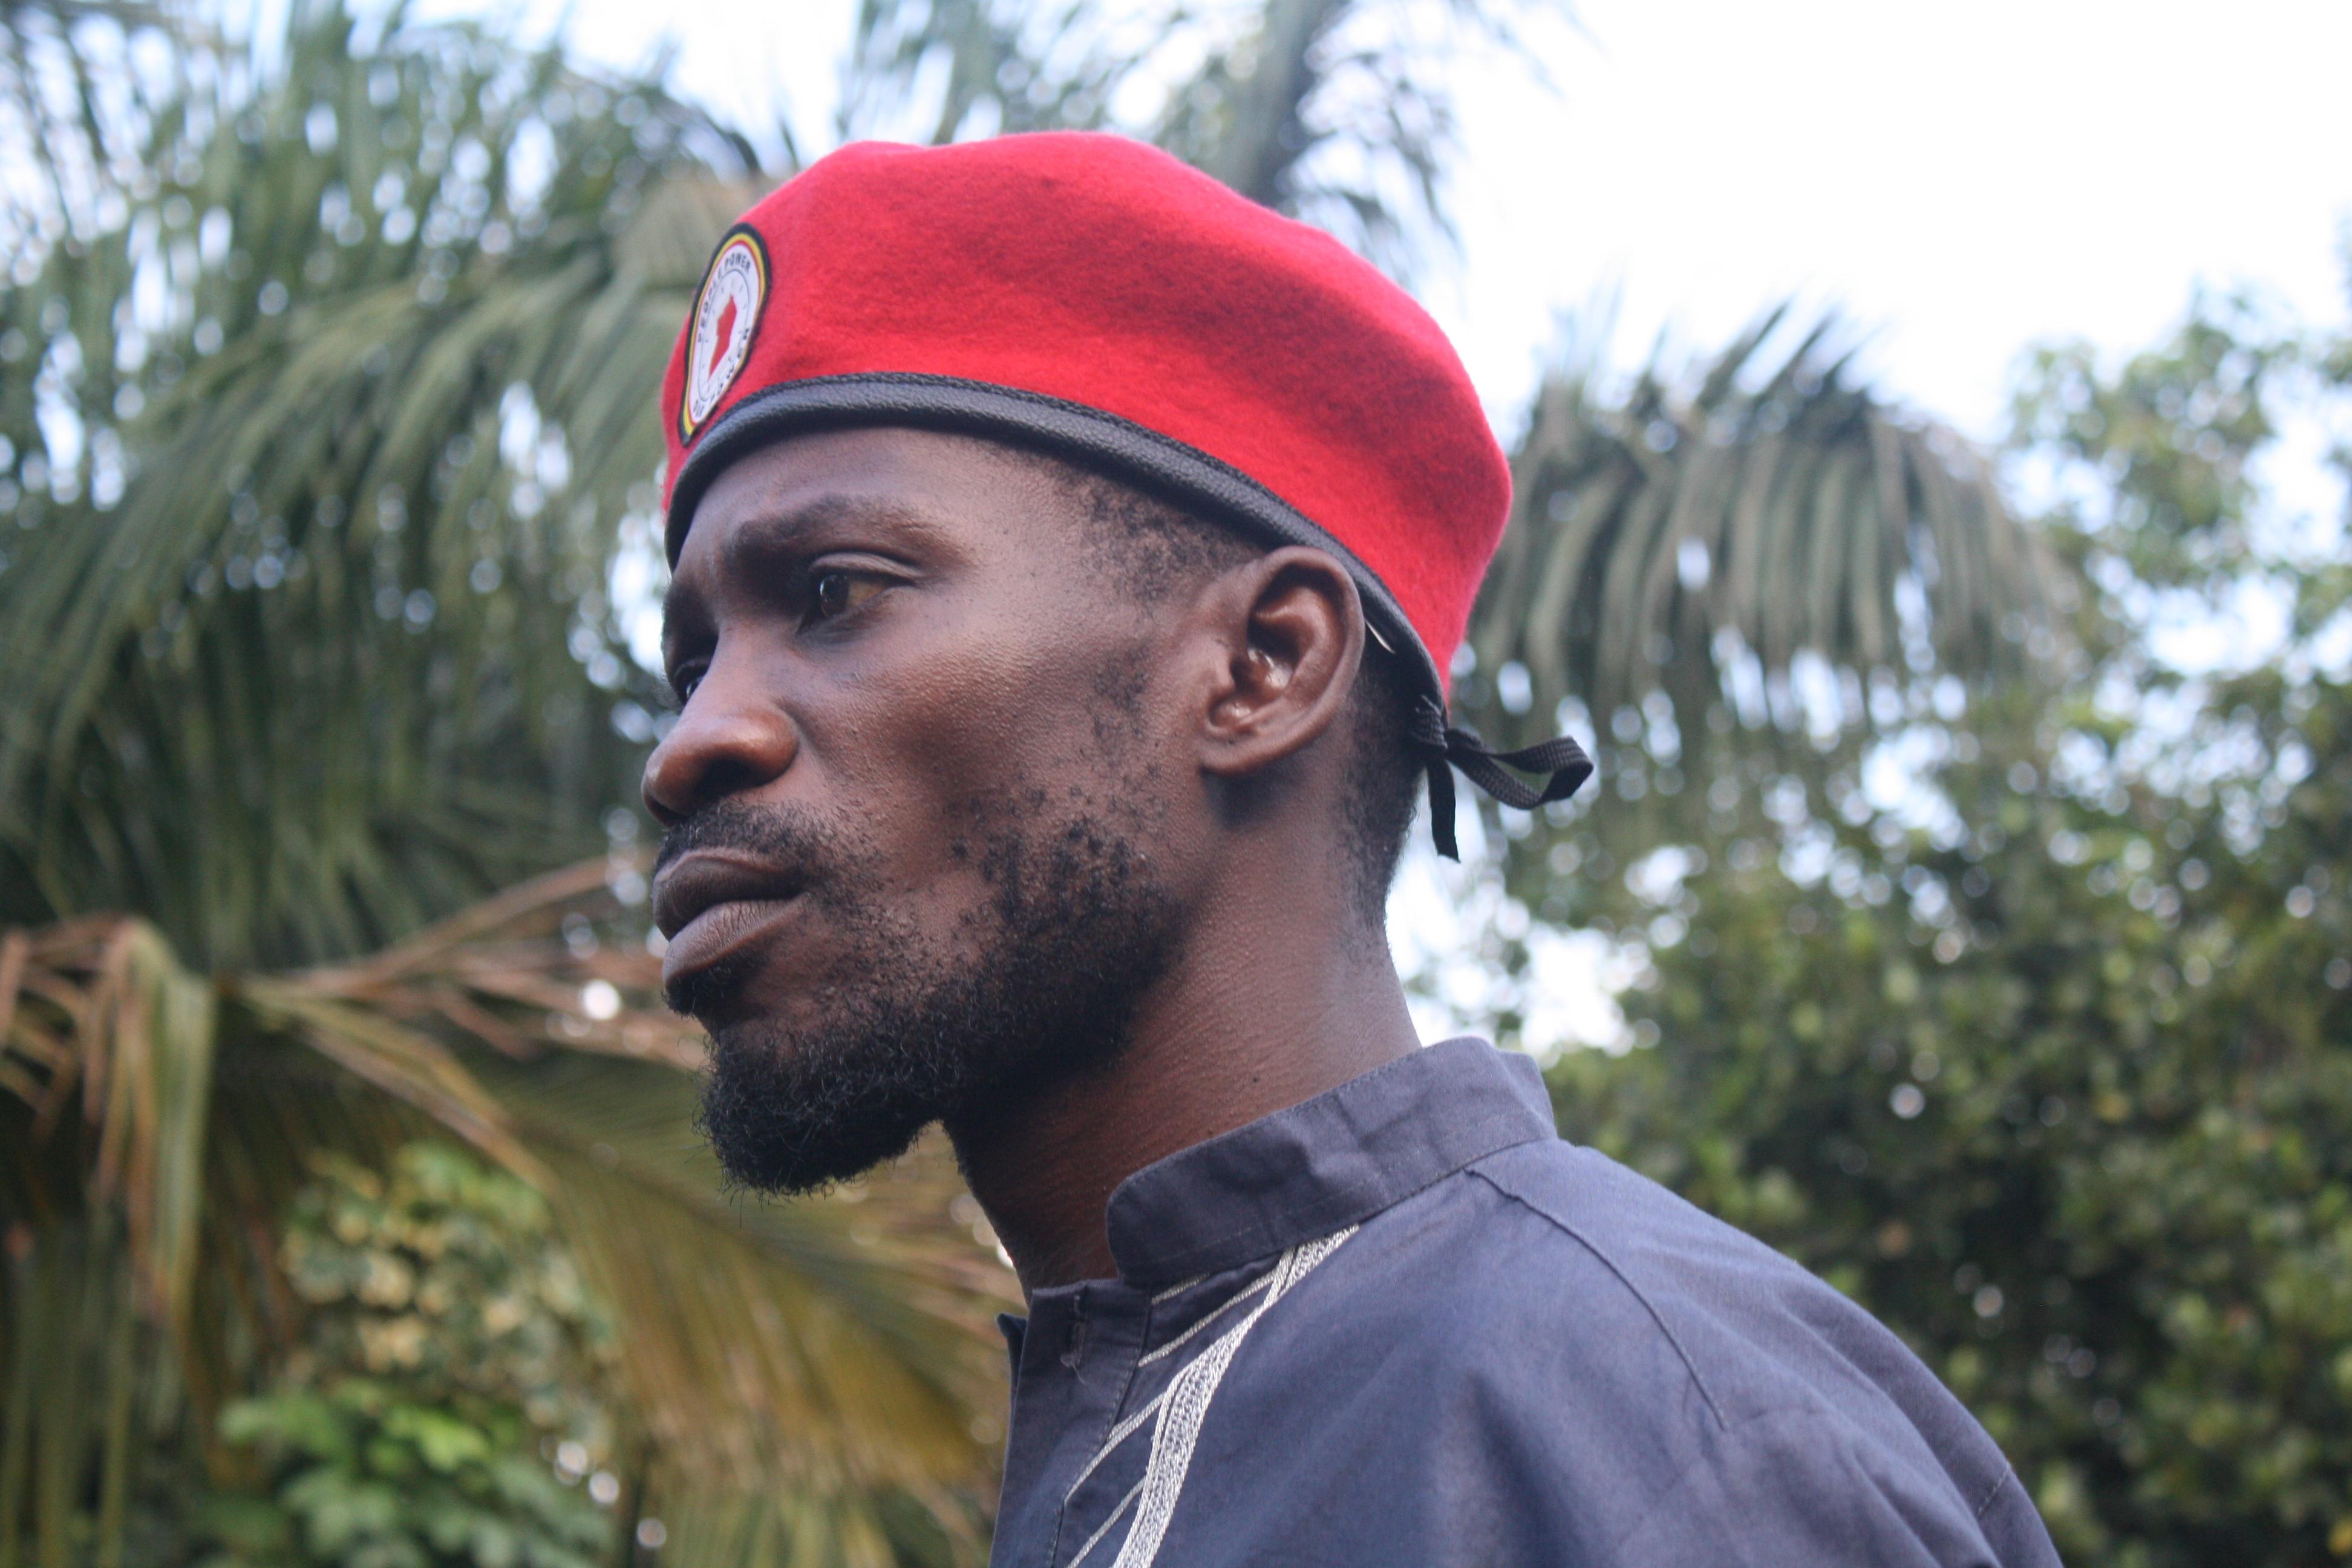 Bobi Wine following his release on bail from maximum security prison. Credit: Sophie Neiman.